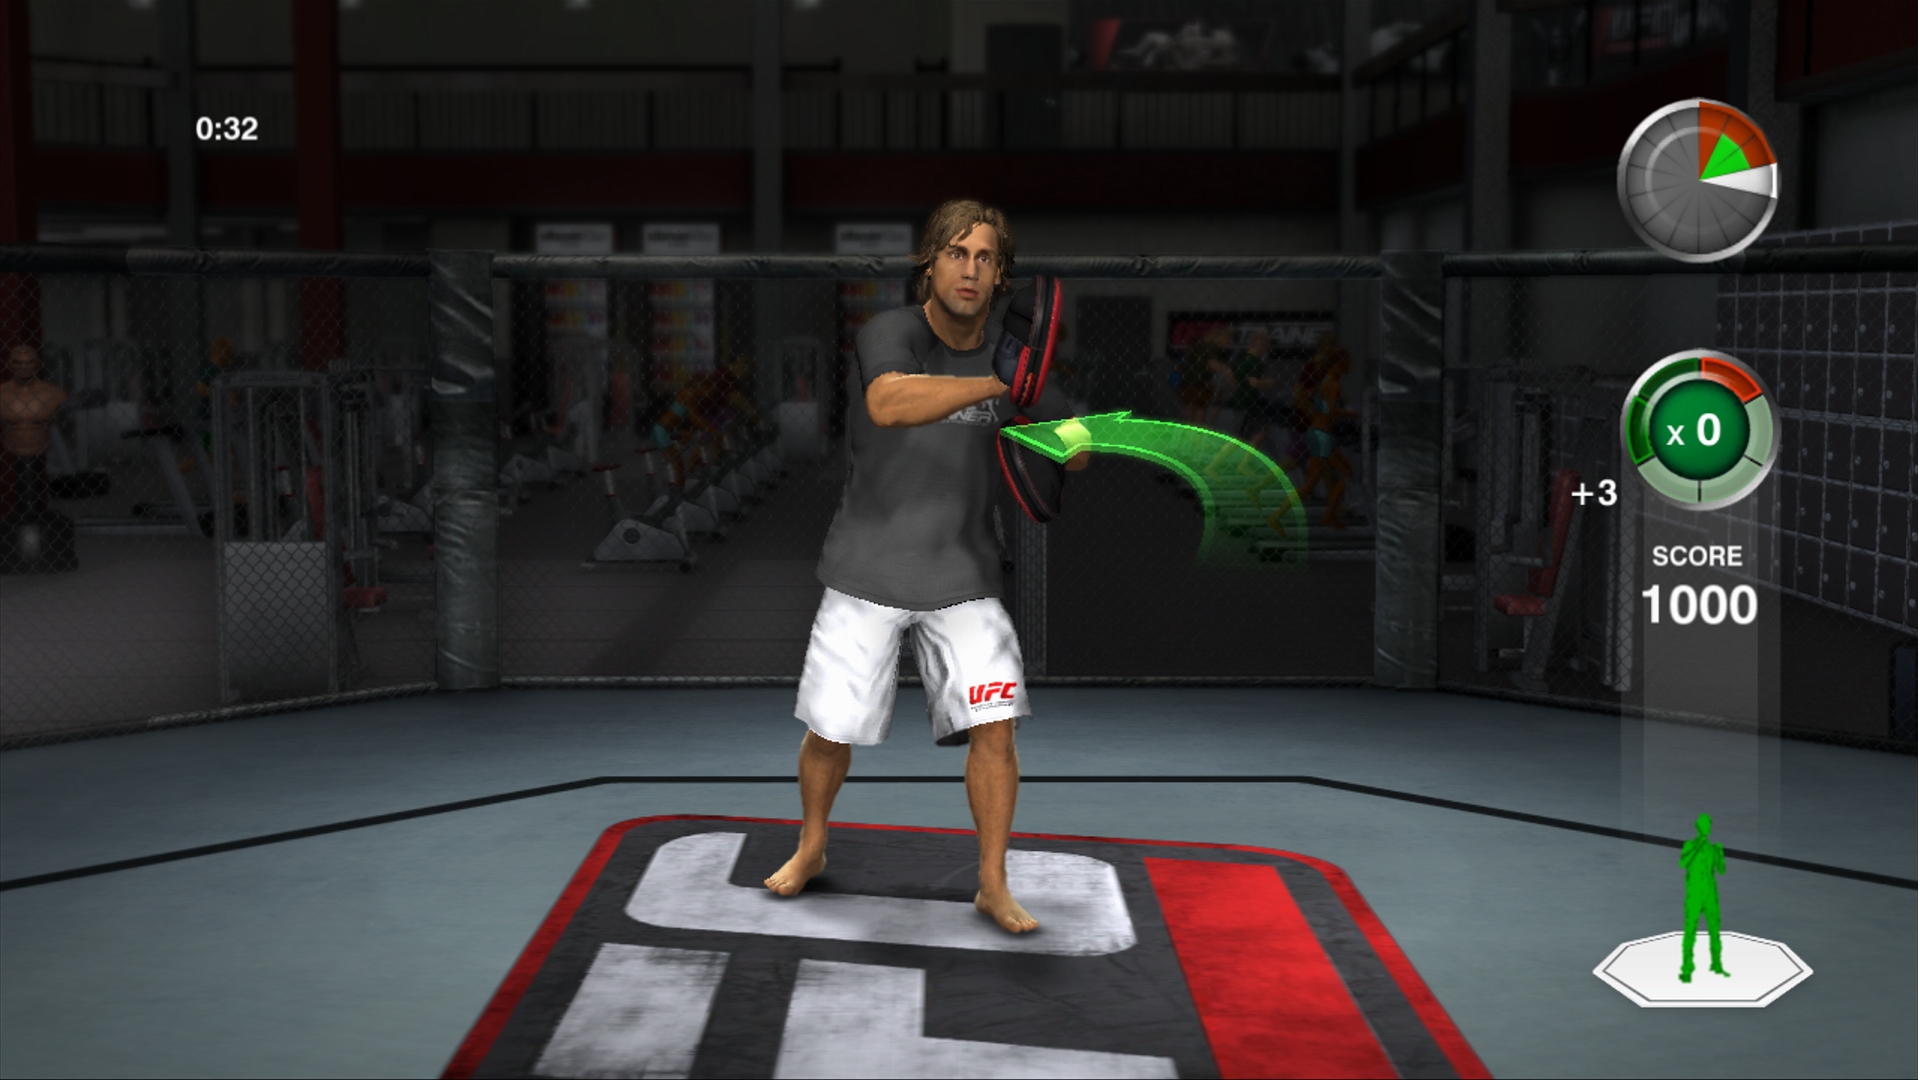 UFC personal Trainer. Xbox 360 Kinect UFC personal Trainer the Ultimate Fitness System. Personal Trainer личный тренер игра. UFC personal Trainer Xbox 360. Игра про тренера